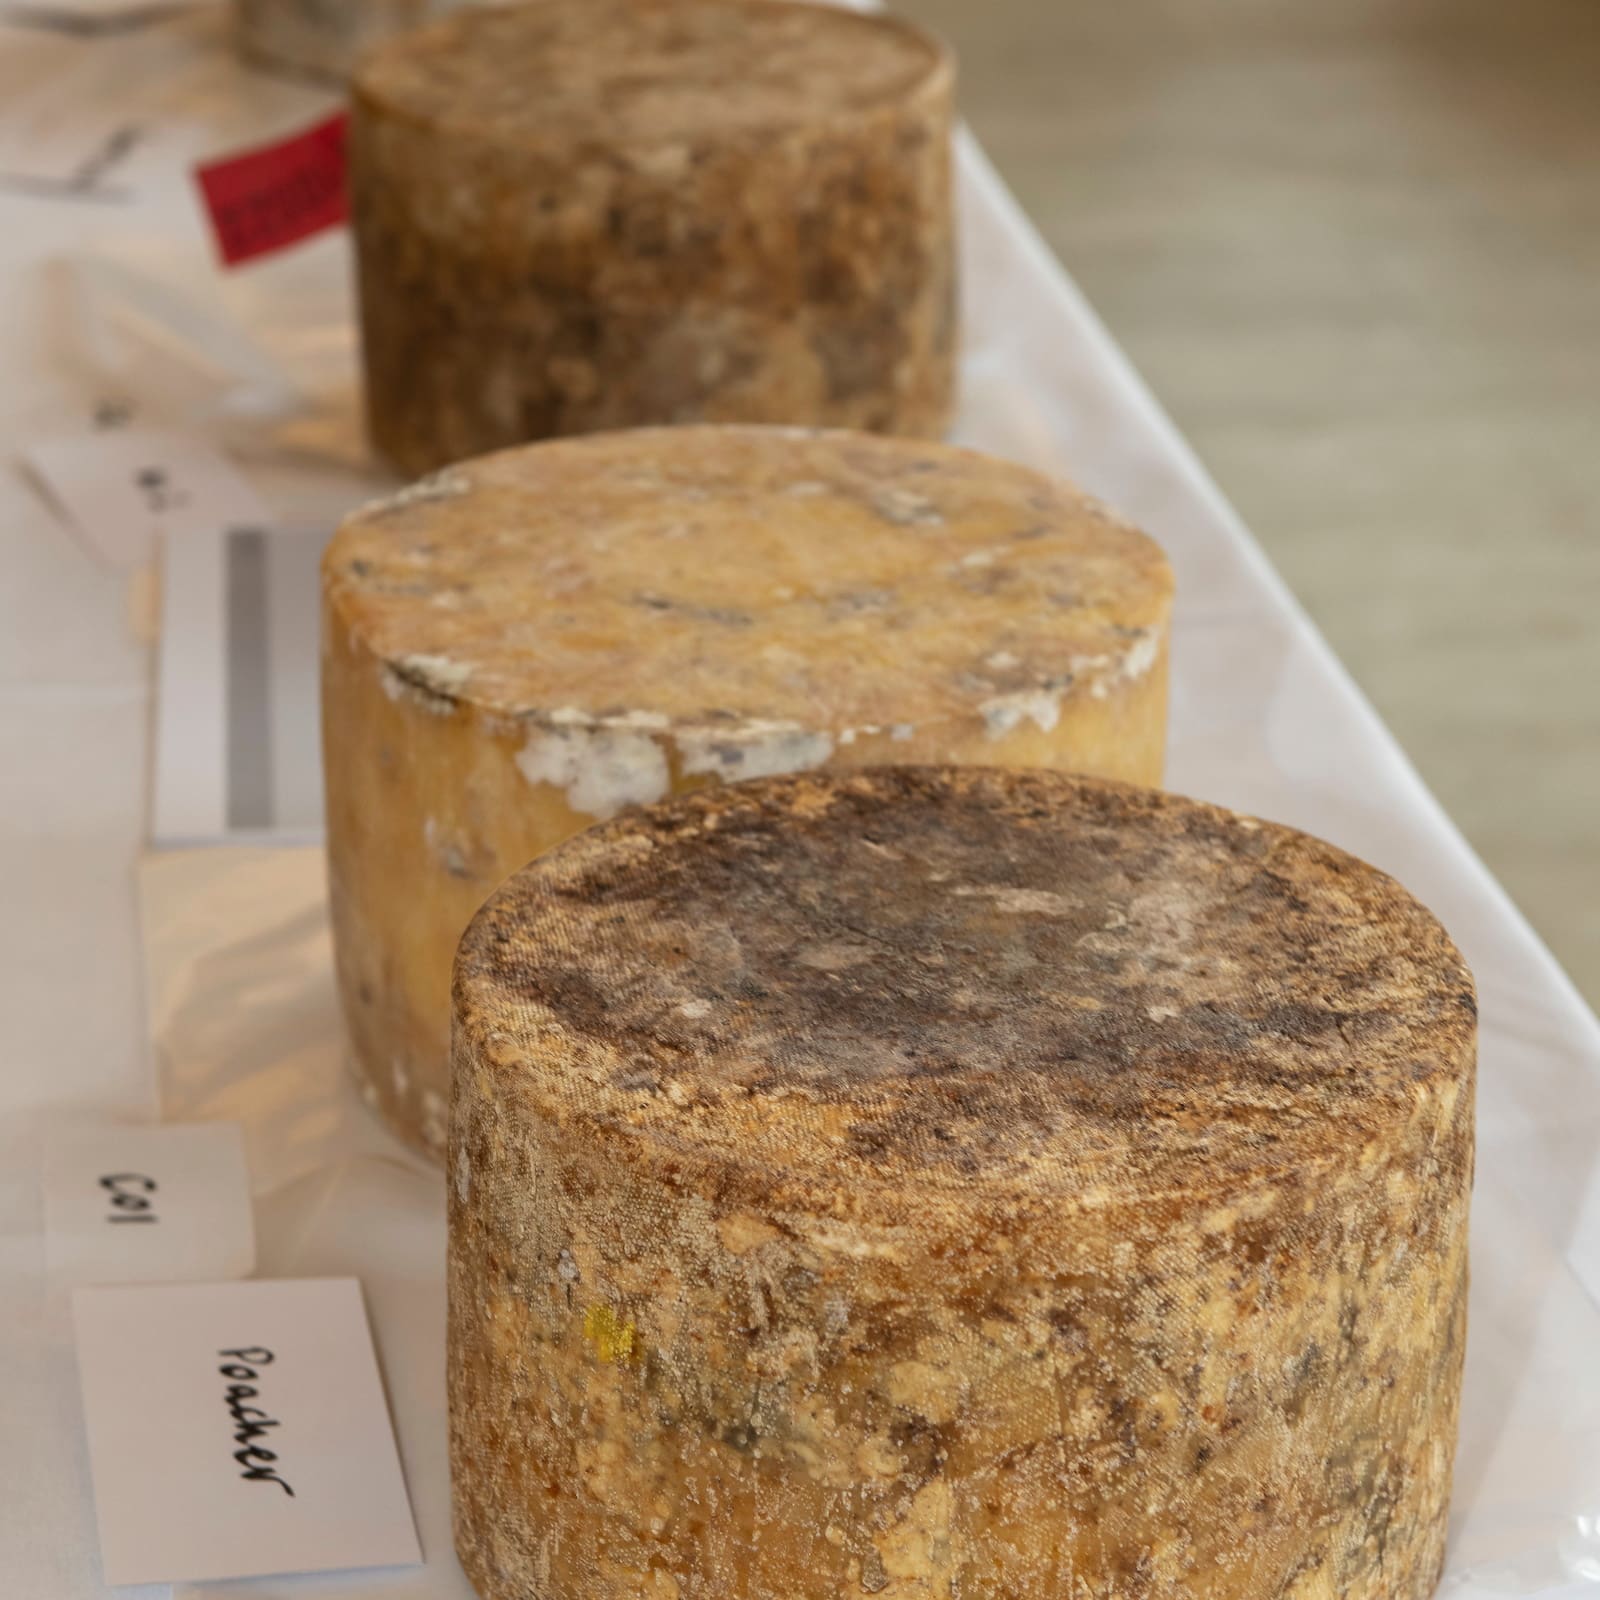 matured cheeses ready for judging